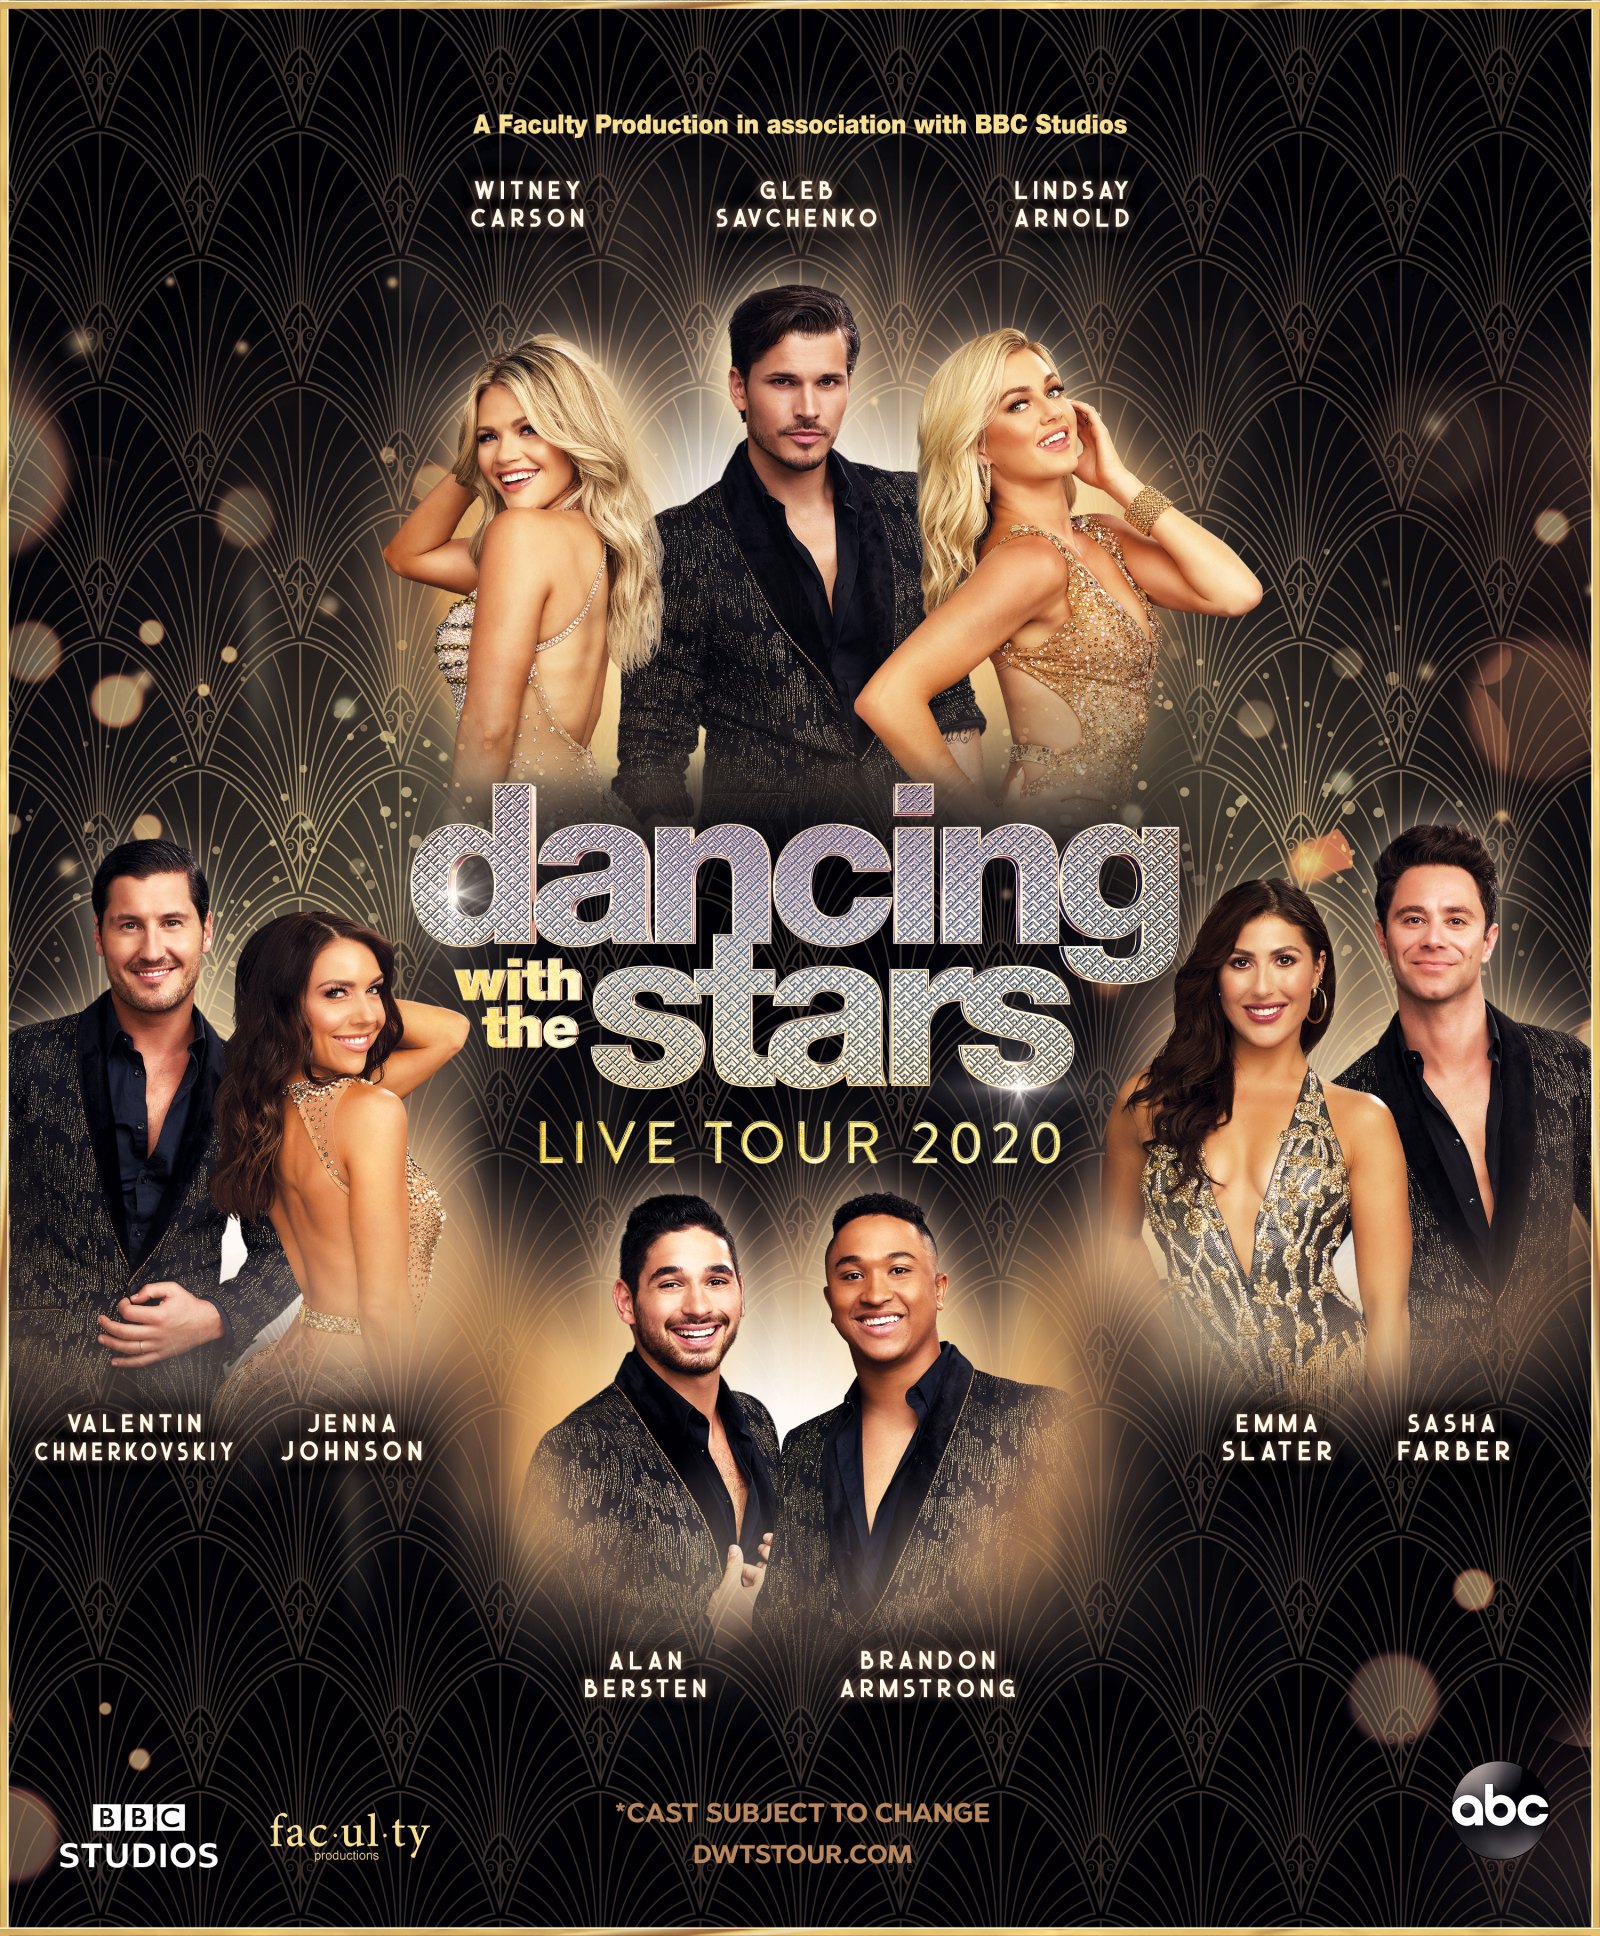 ‘Dancing With the Stars Live Tour 2020’ Announced